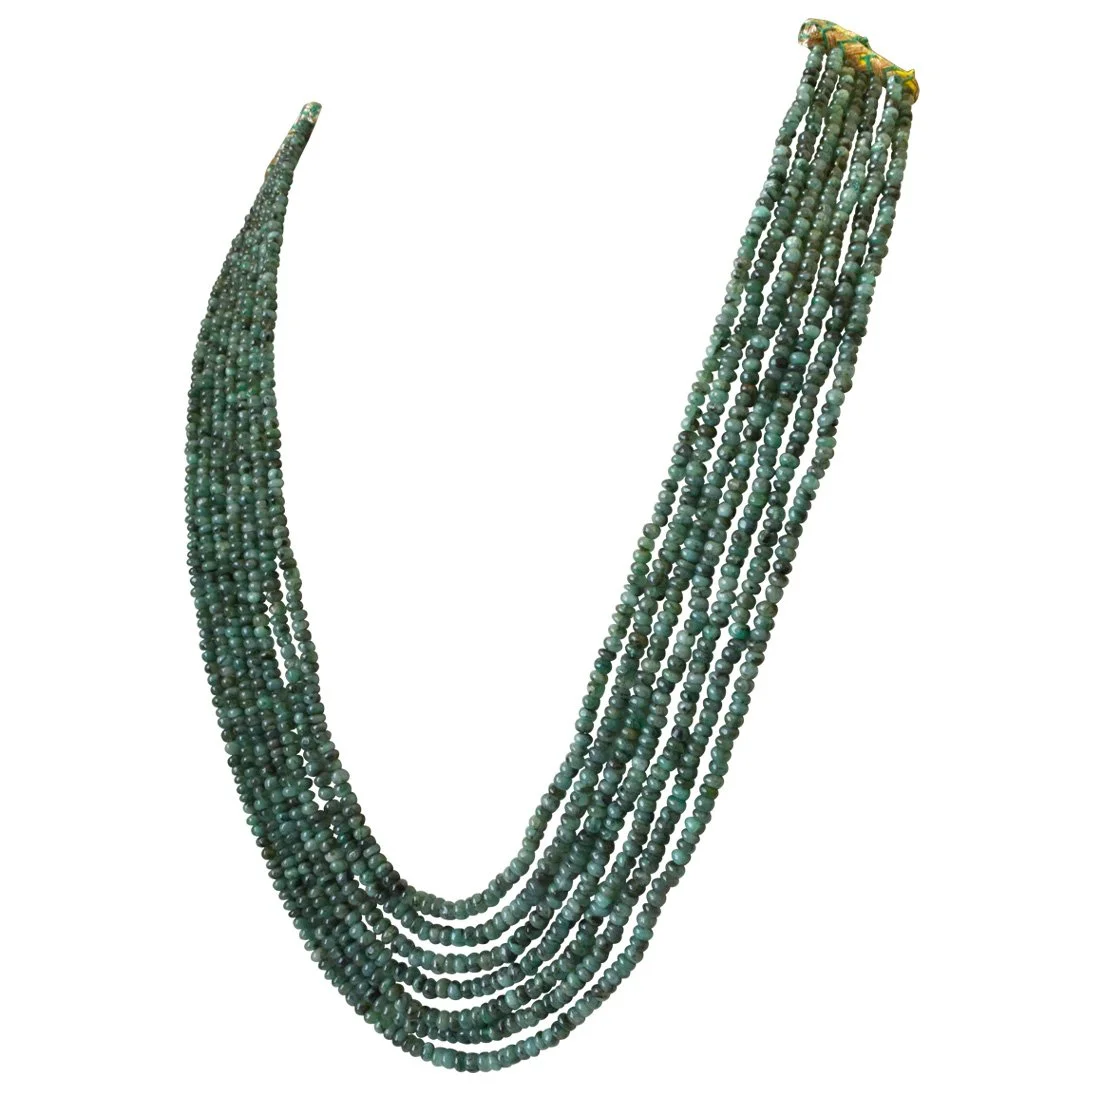 7 Line 366cts REAL Natural Green Emerald Beads Necklace for Women (366cts EMR Neck)